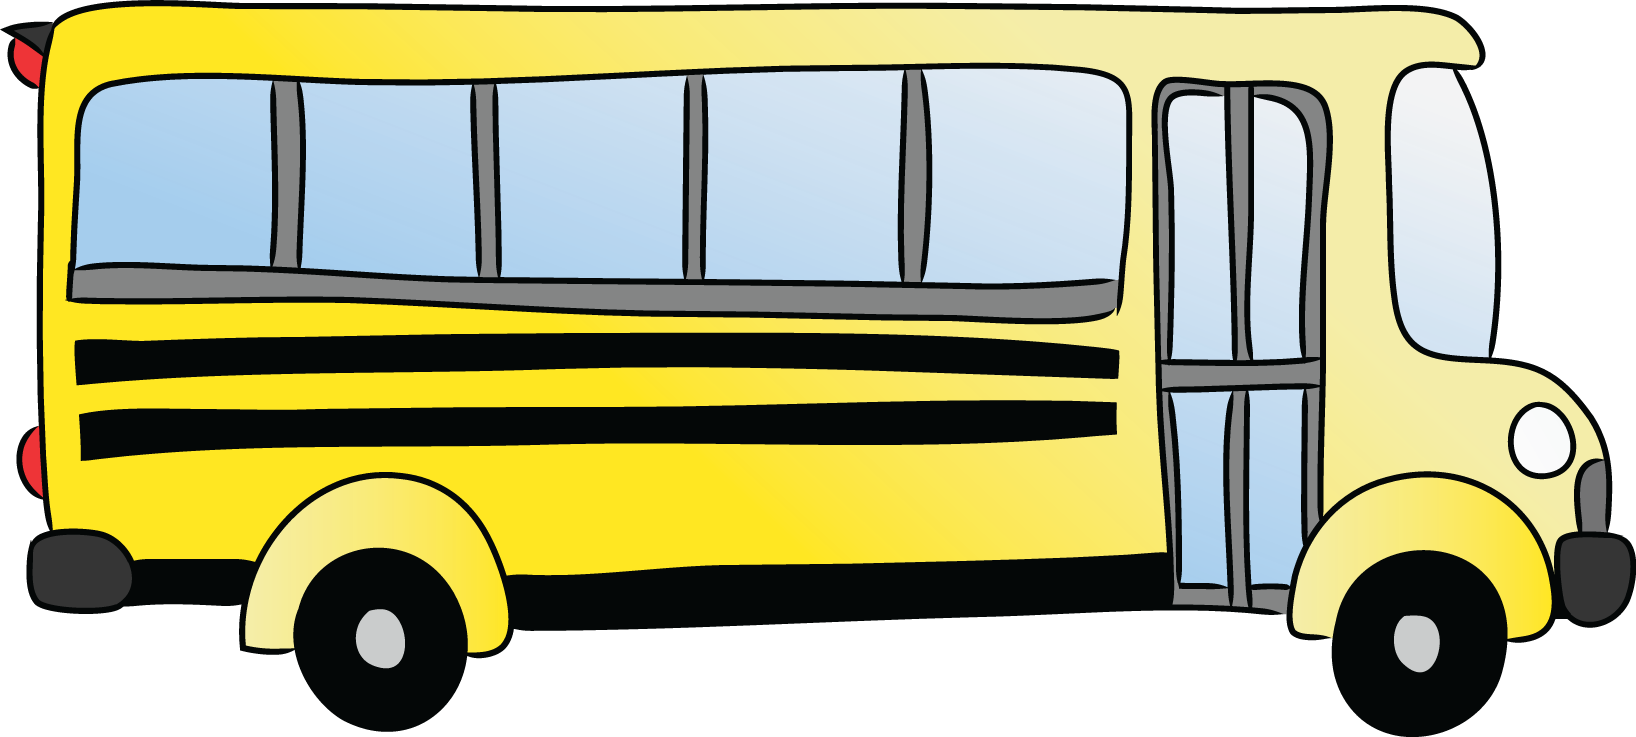 moving bus clipart - photo #26